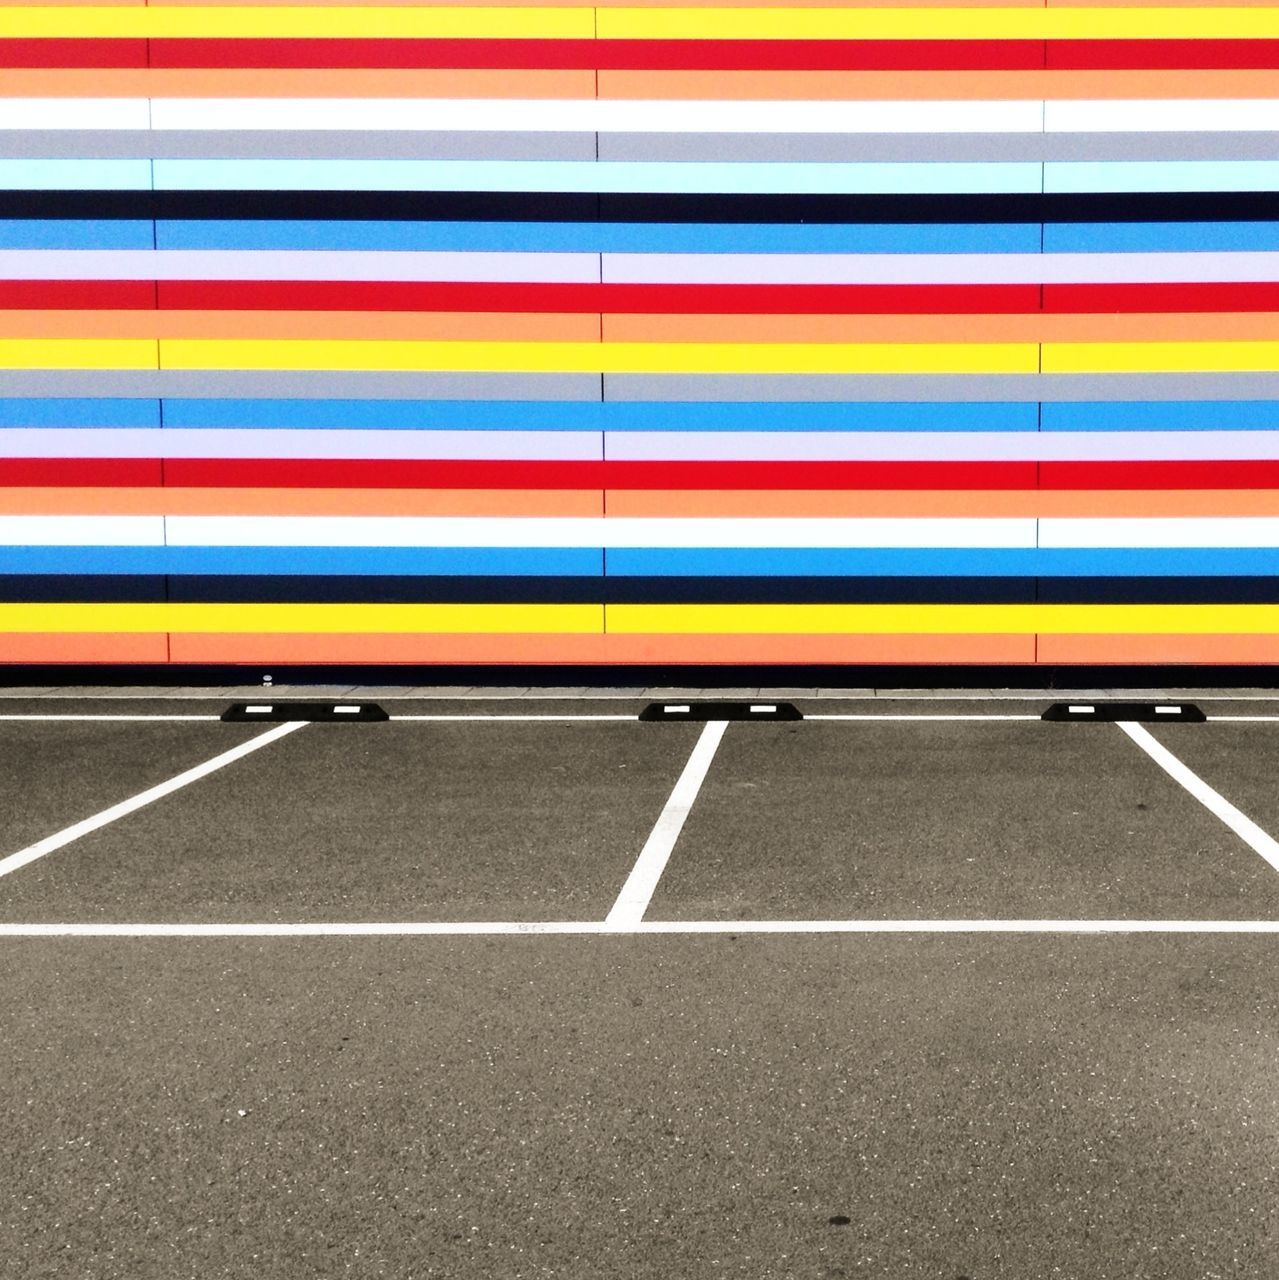 road marking, transportation, road, red, multi colored, striped, street, asphalt, the way forward, in a row, empty, pattern, guidance, outdoors, white color, arrow symbol, no people, dividing line, direction, diminishing perspective